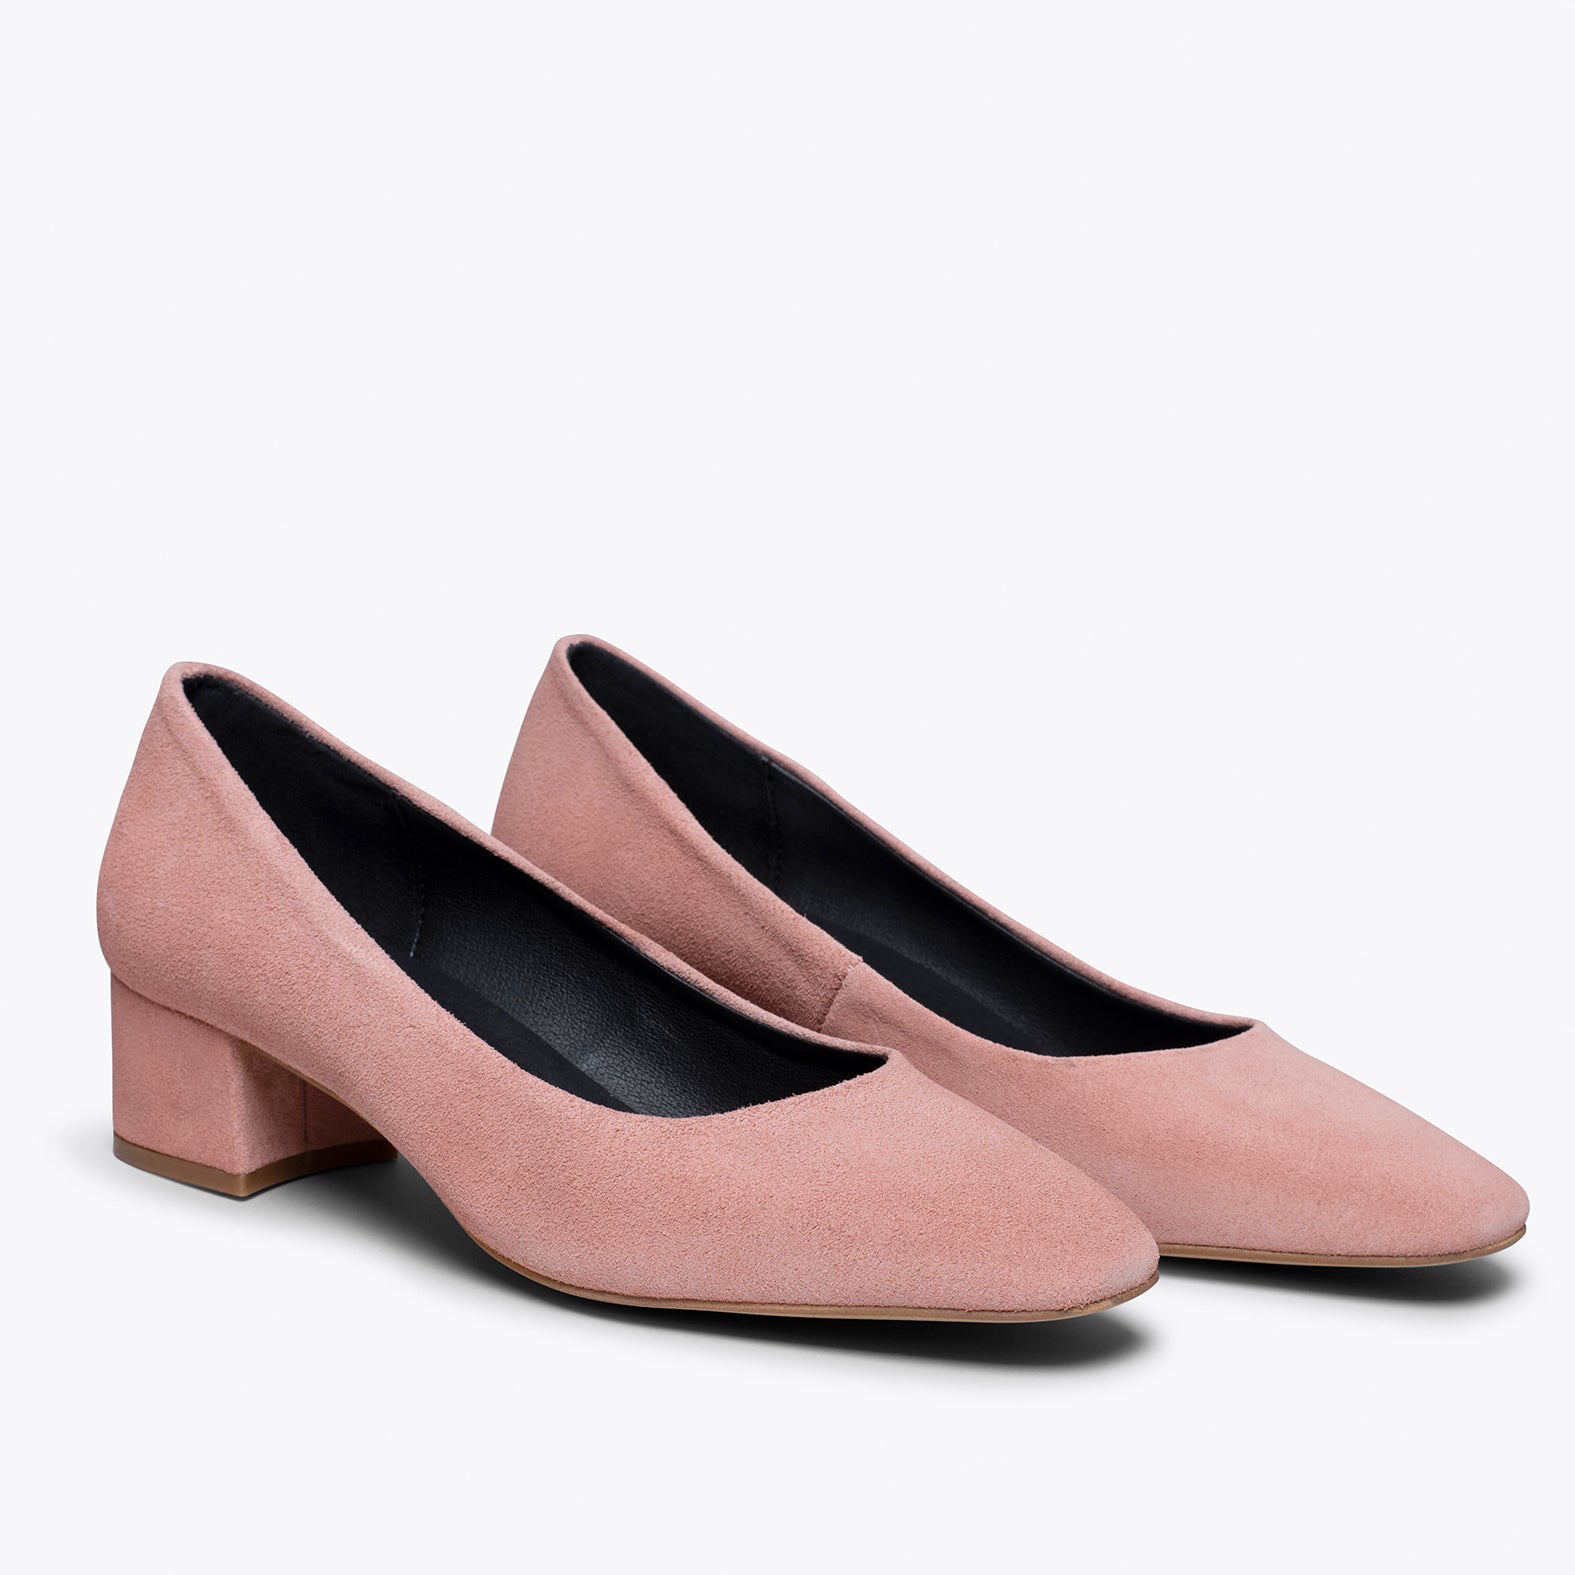 TREND – NUDE square pointed mid heel